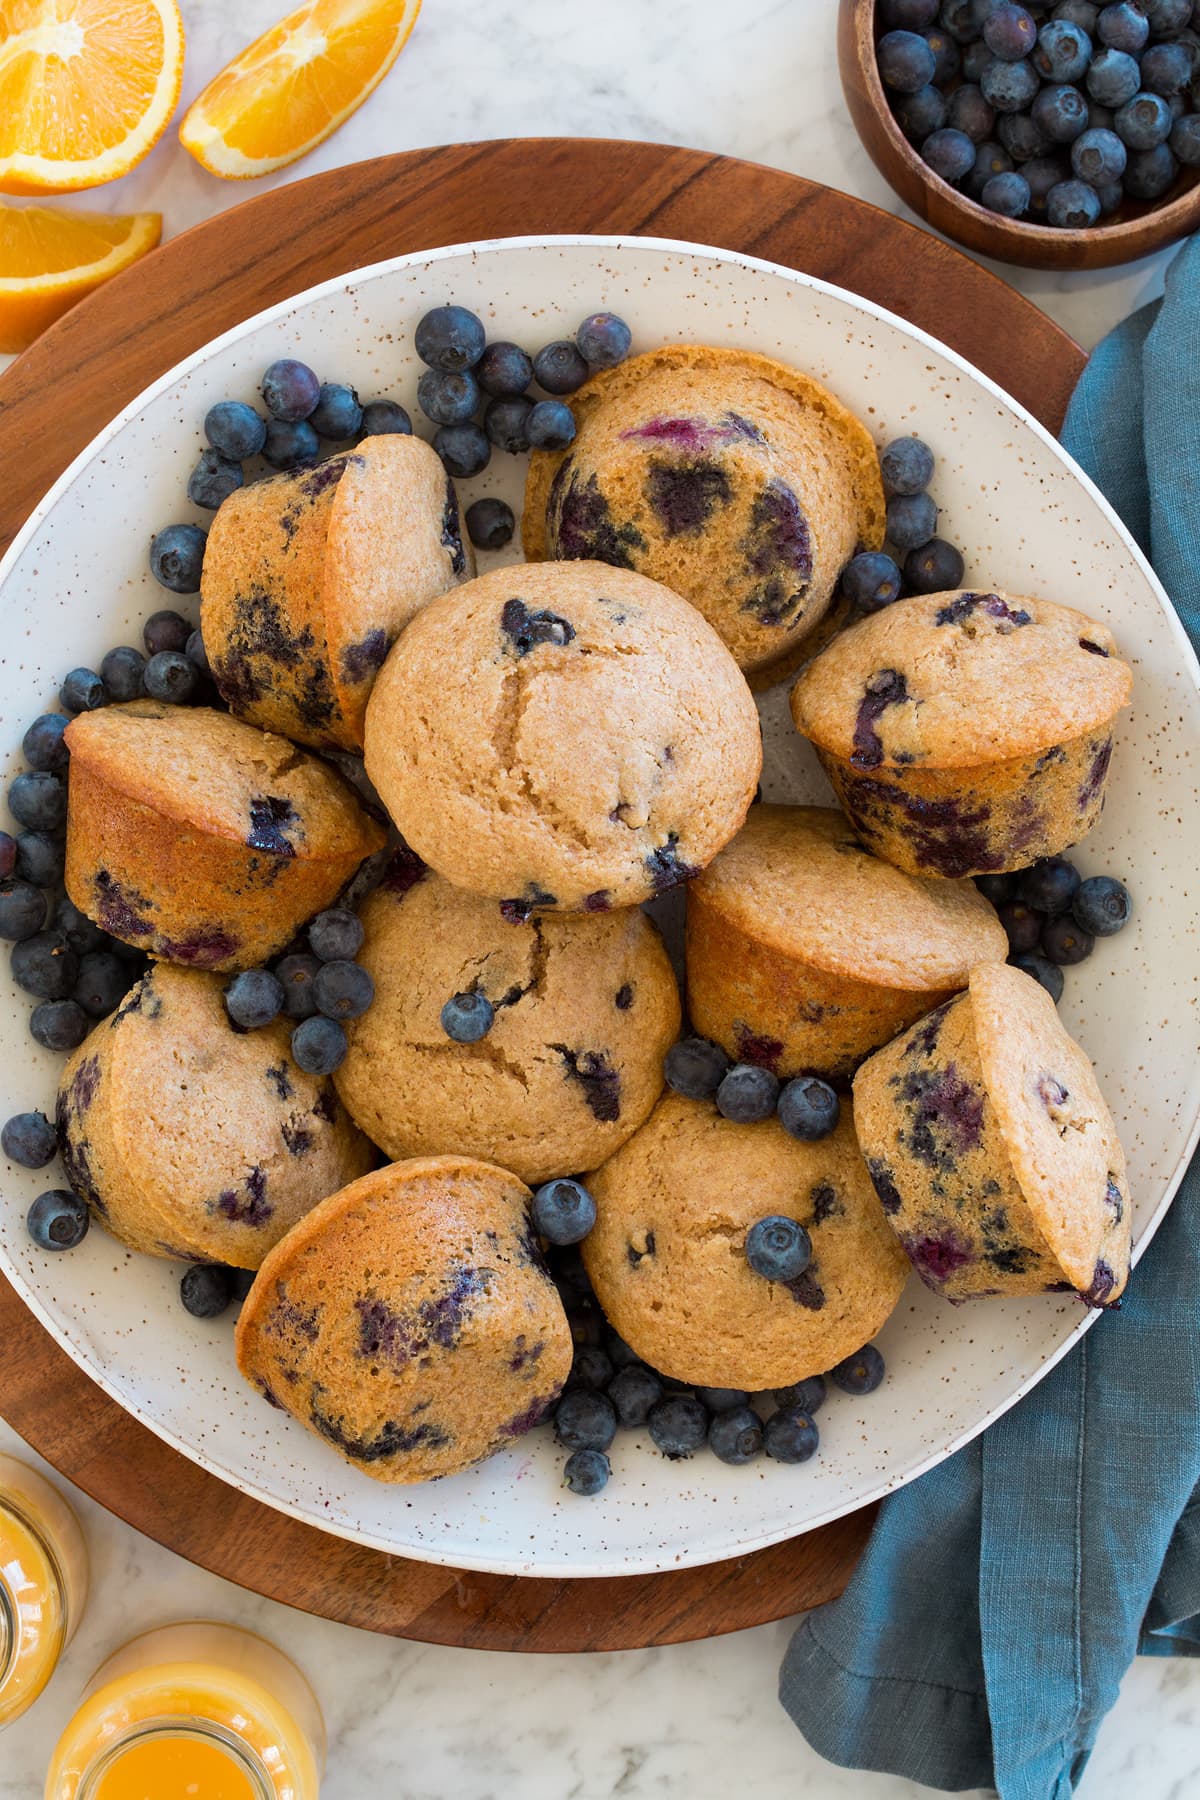 Serving bowl full of healthy blueberry muffins and fresh blueberries.